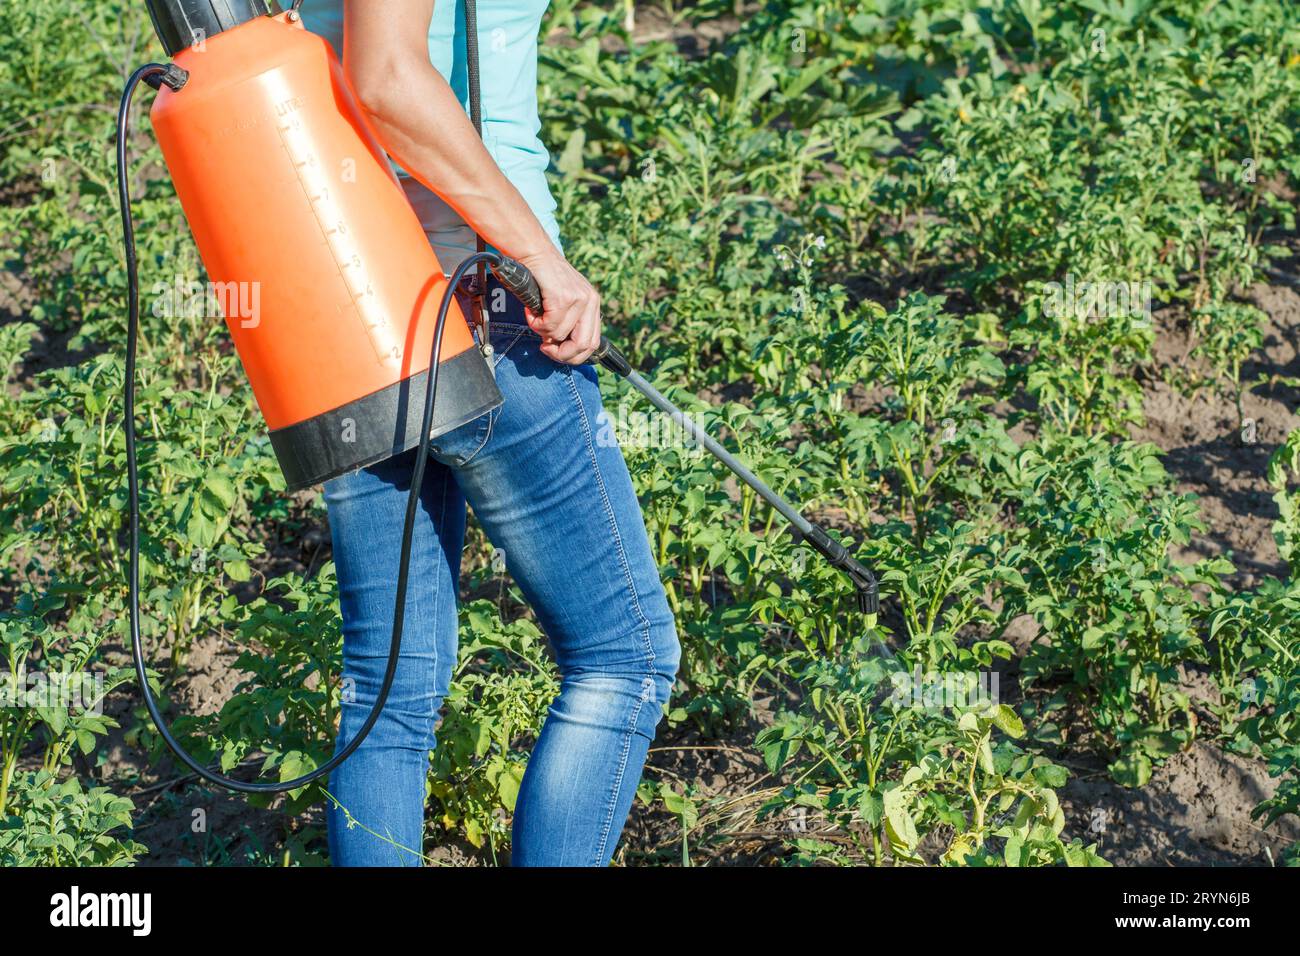 Protecting potatoes plants from fungal disease or vermin with a pressure sprayer Stock Photo